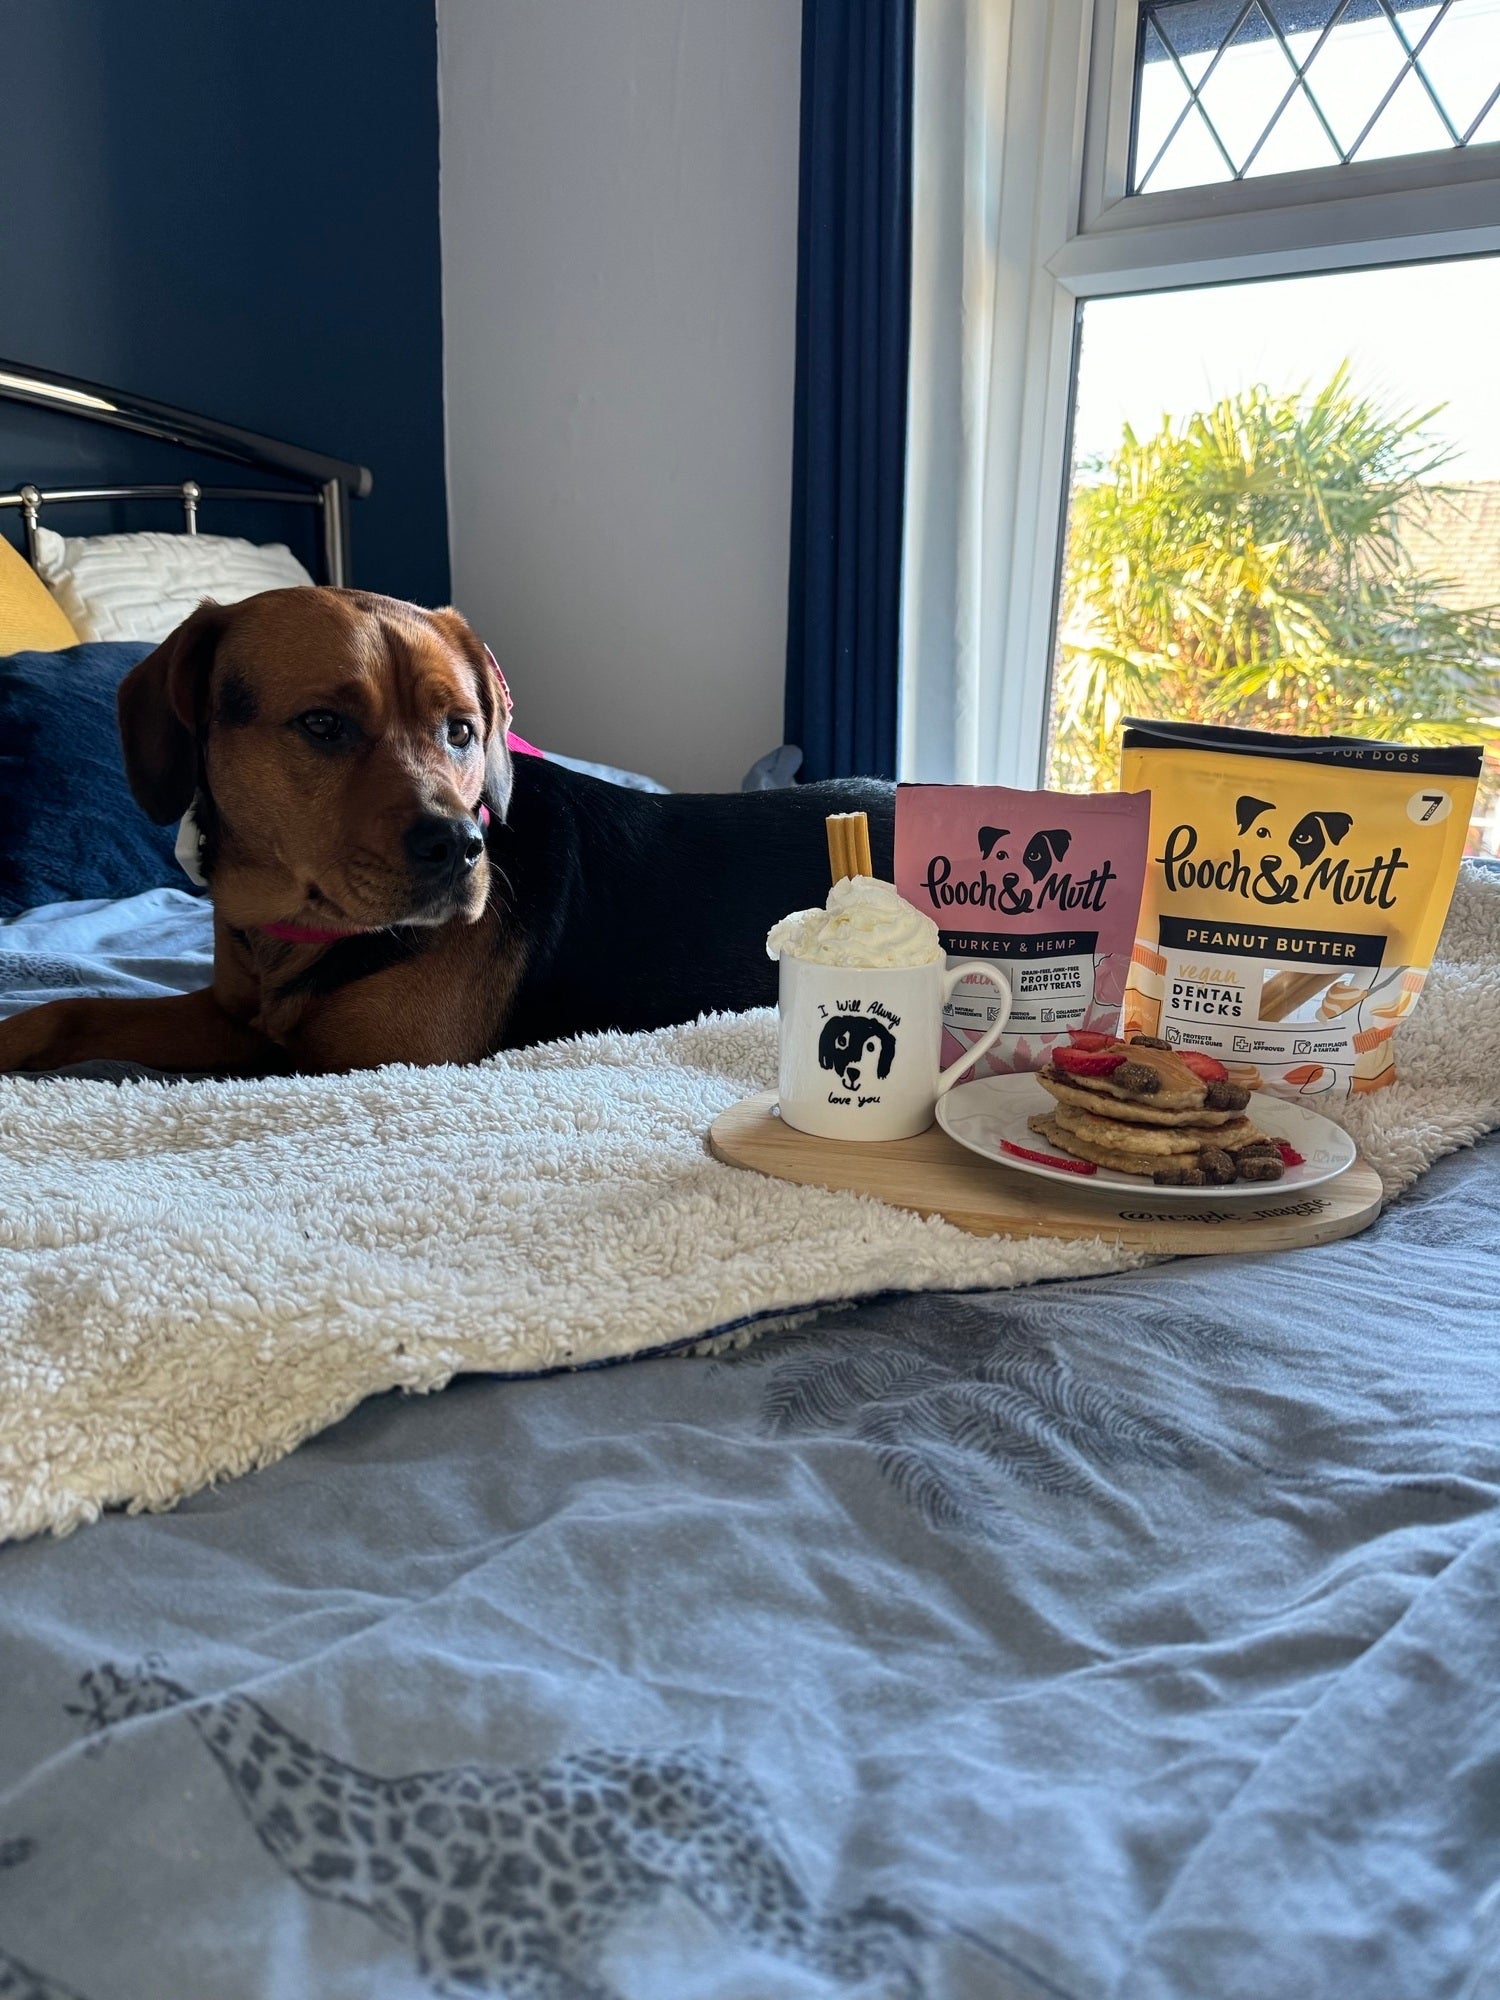 A tan and black short-haired dog, lay on a human bed, with a plate of pooch-friendly pancakes and Pooch & Mutt products